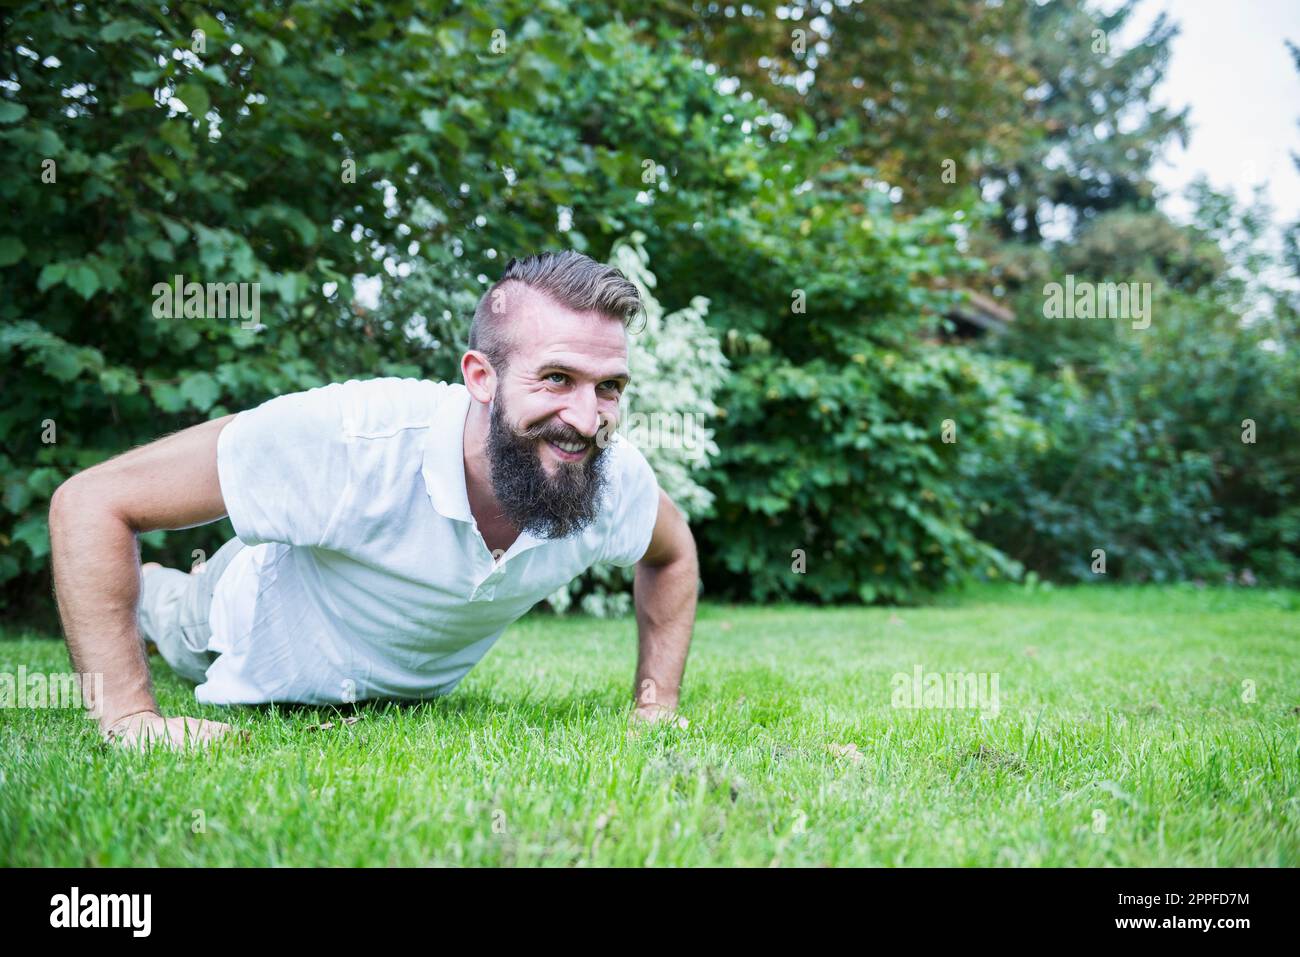 Young man doing push-ups in garden, Bavaria, Germany Stock Photo